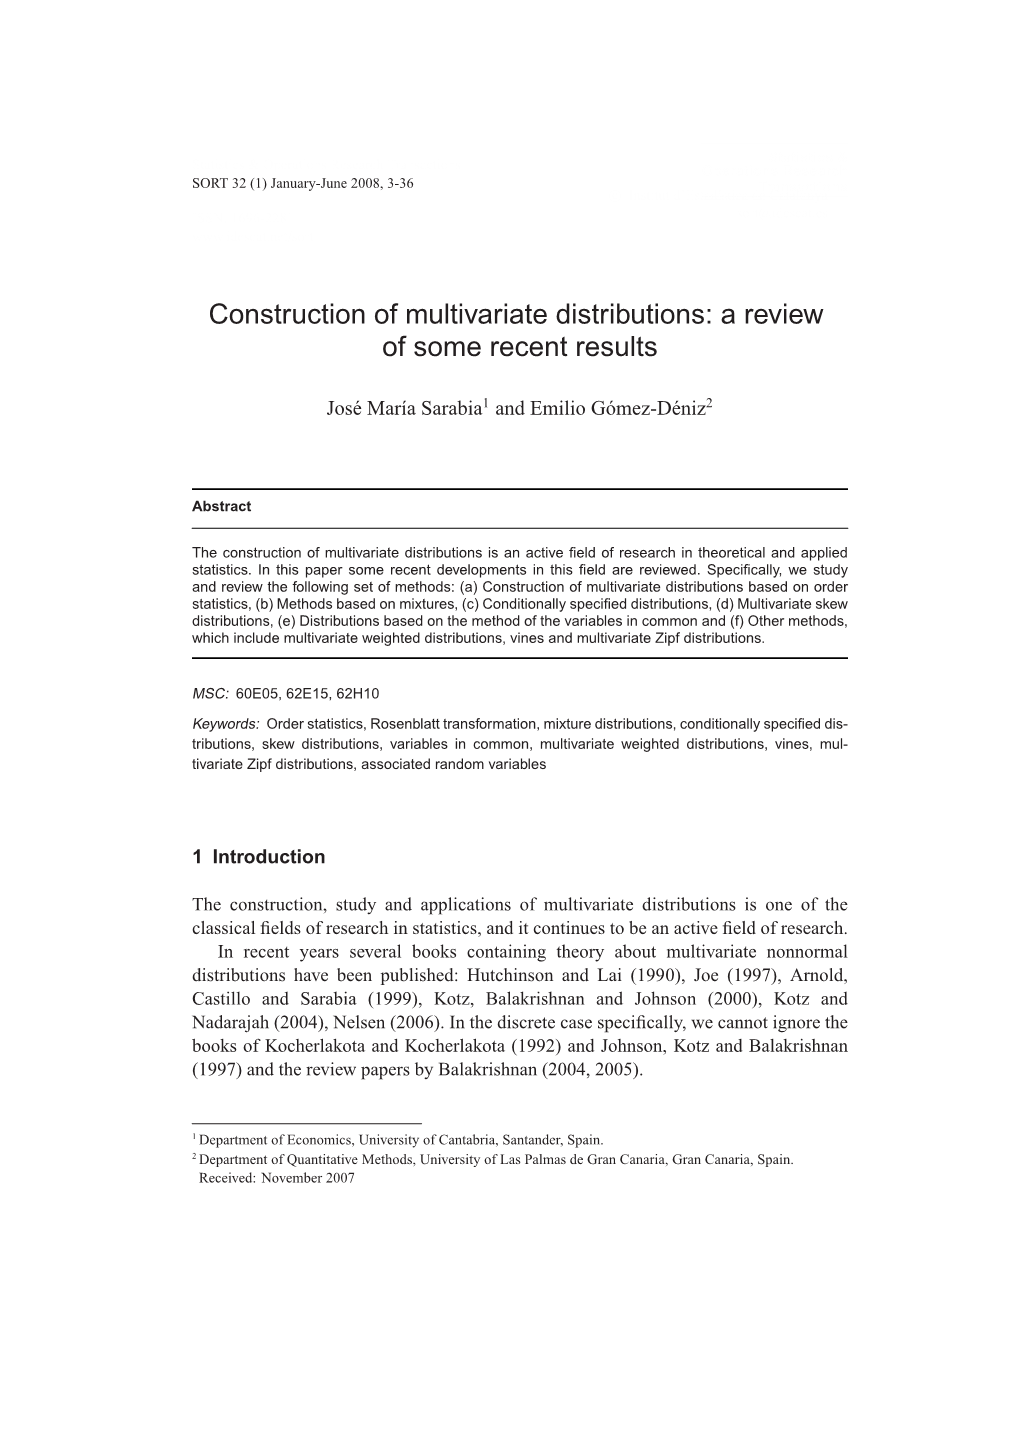 Idescat. SORT. Construction of Multivariate Distributions: a Review